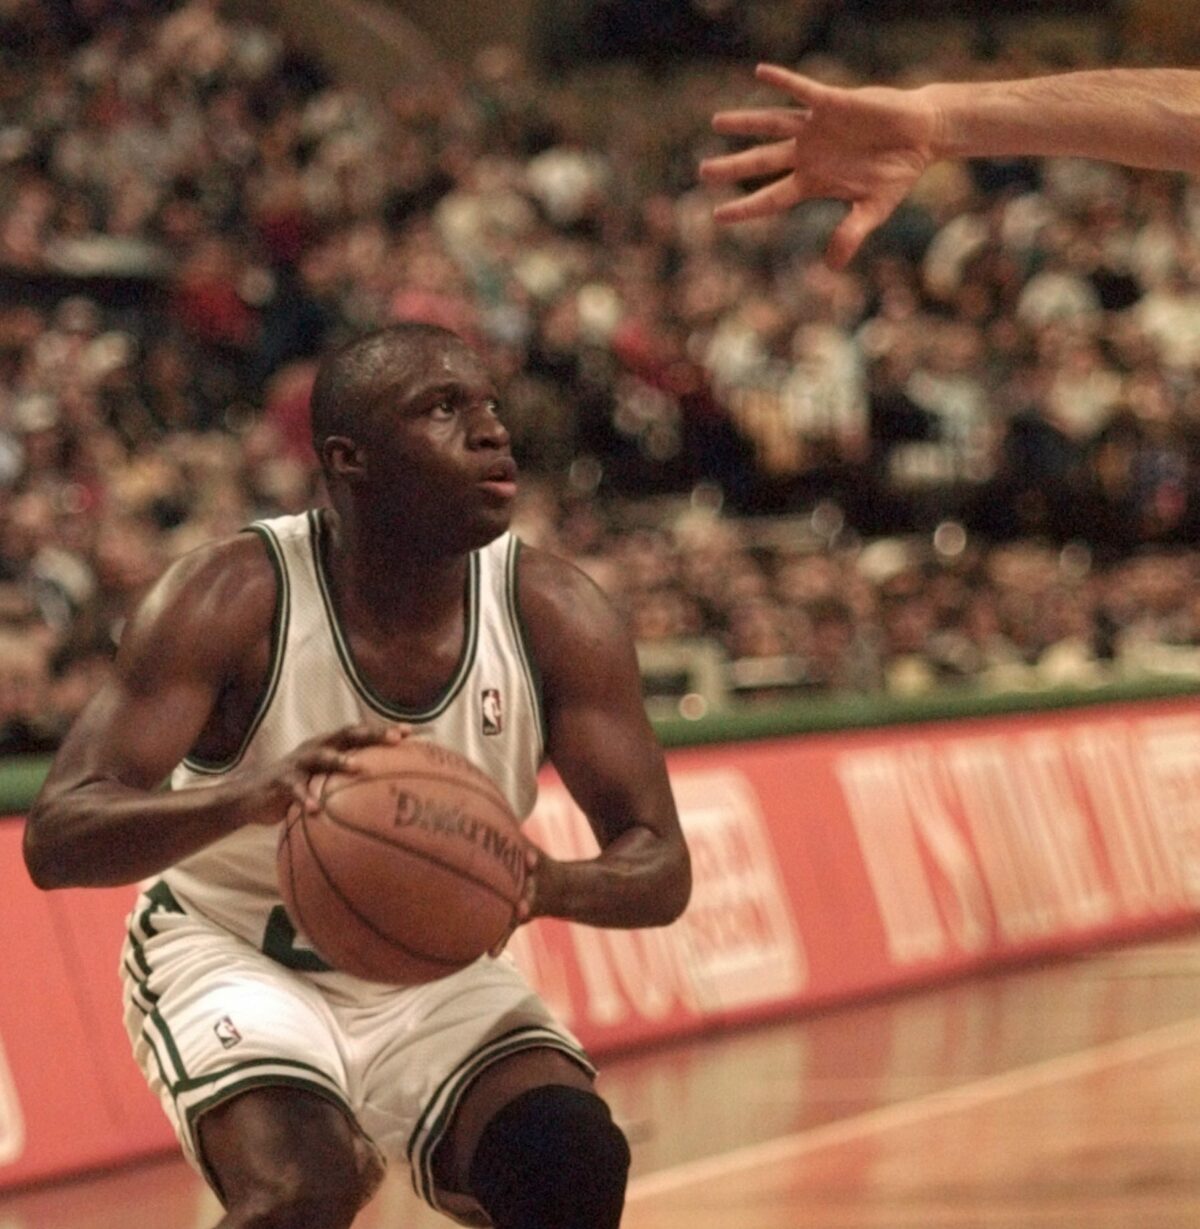 Why did the Boston Celtics stink so much in the 1990s?